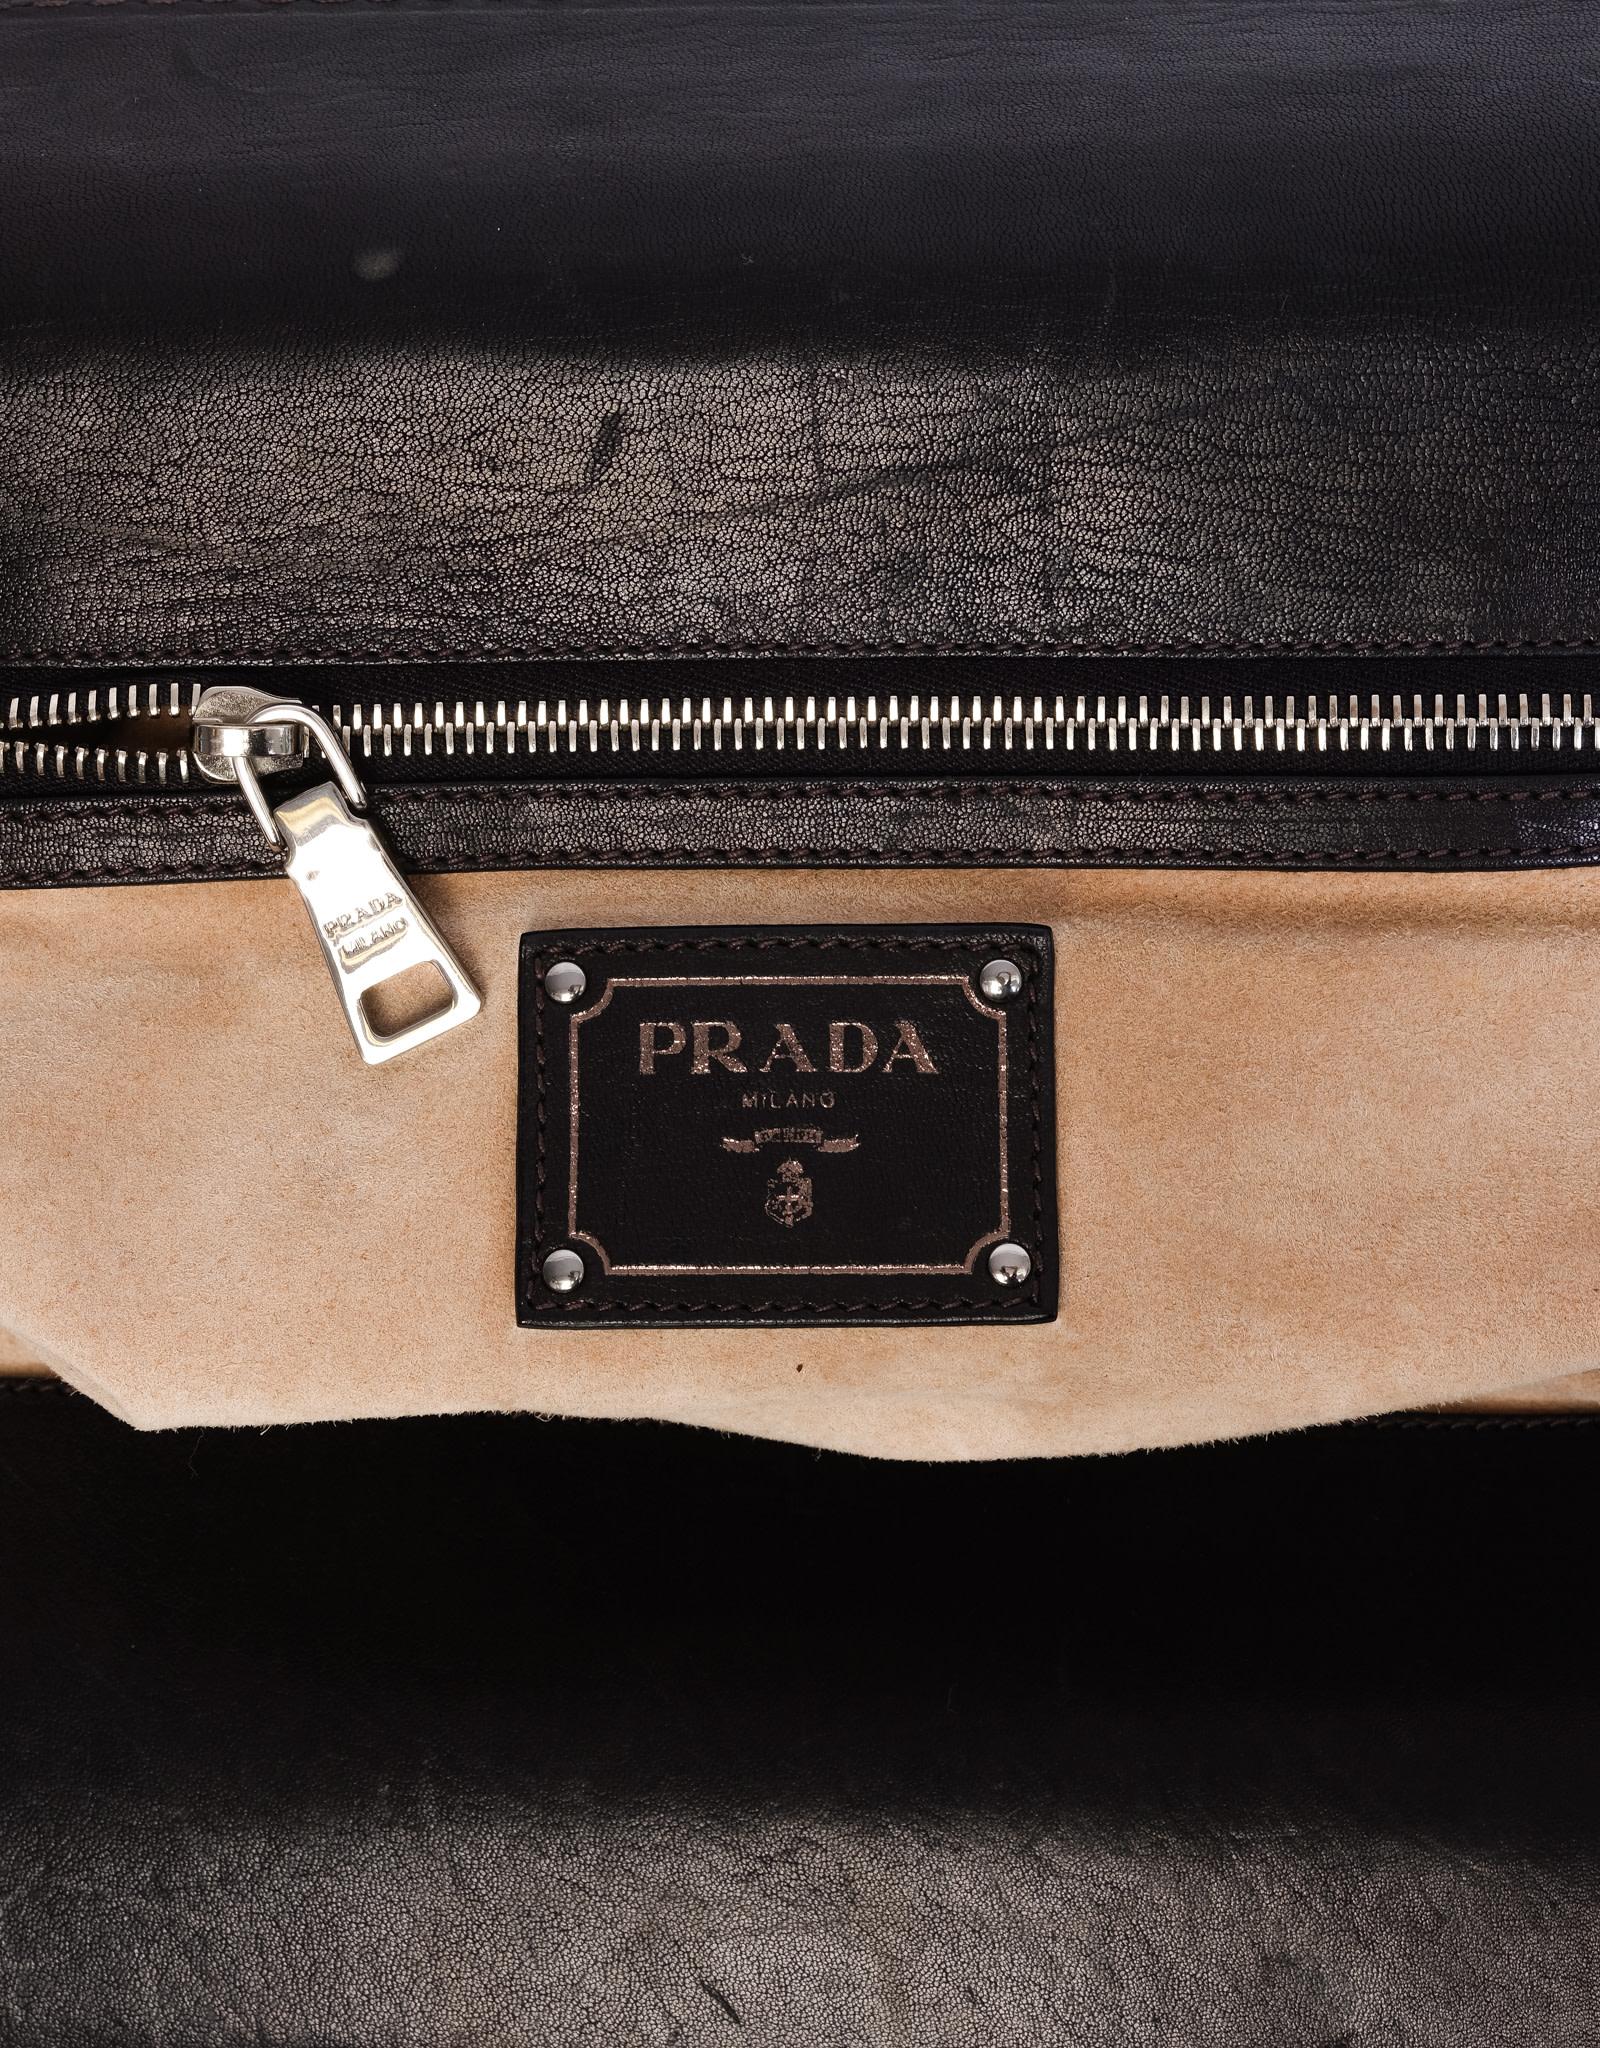  Prada Large Camo Ruched Gaufre Handbag In Good Condition For Sale In Montreal, Quebec